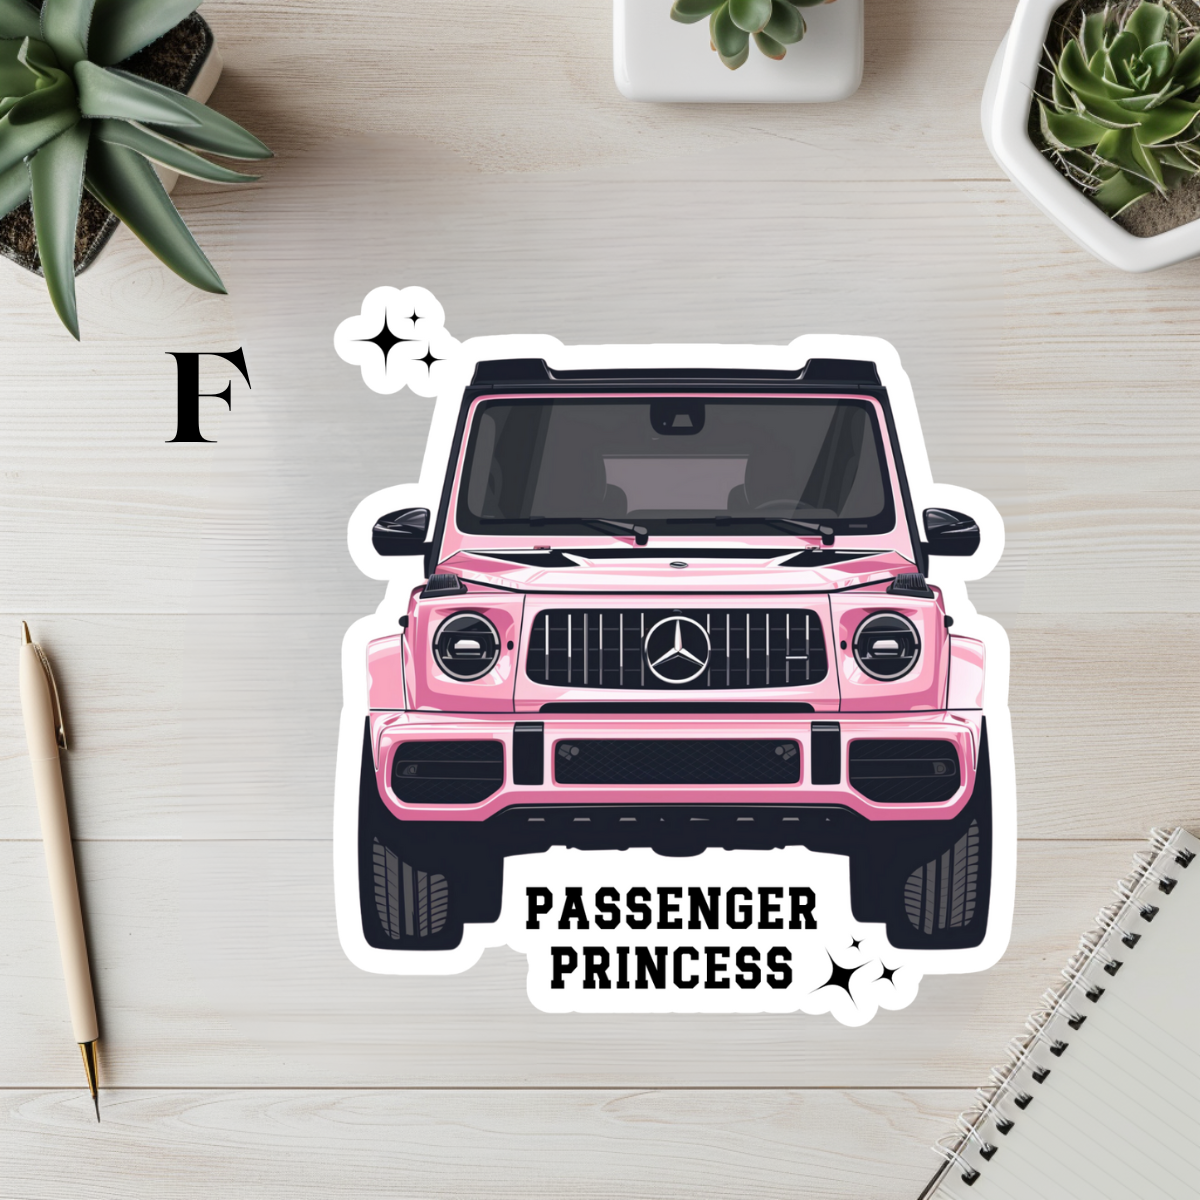 Girly Pink Sticker Pack for the perfect gift for her it's trendy stickers with Inspirational quotes just simply pretty glamorous stickers for everyday Luxury.